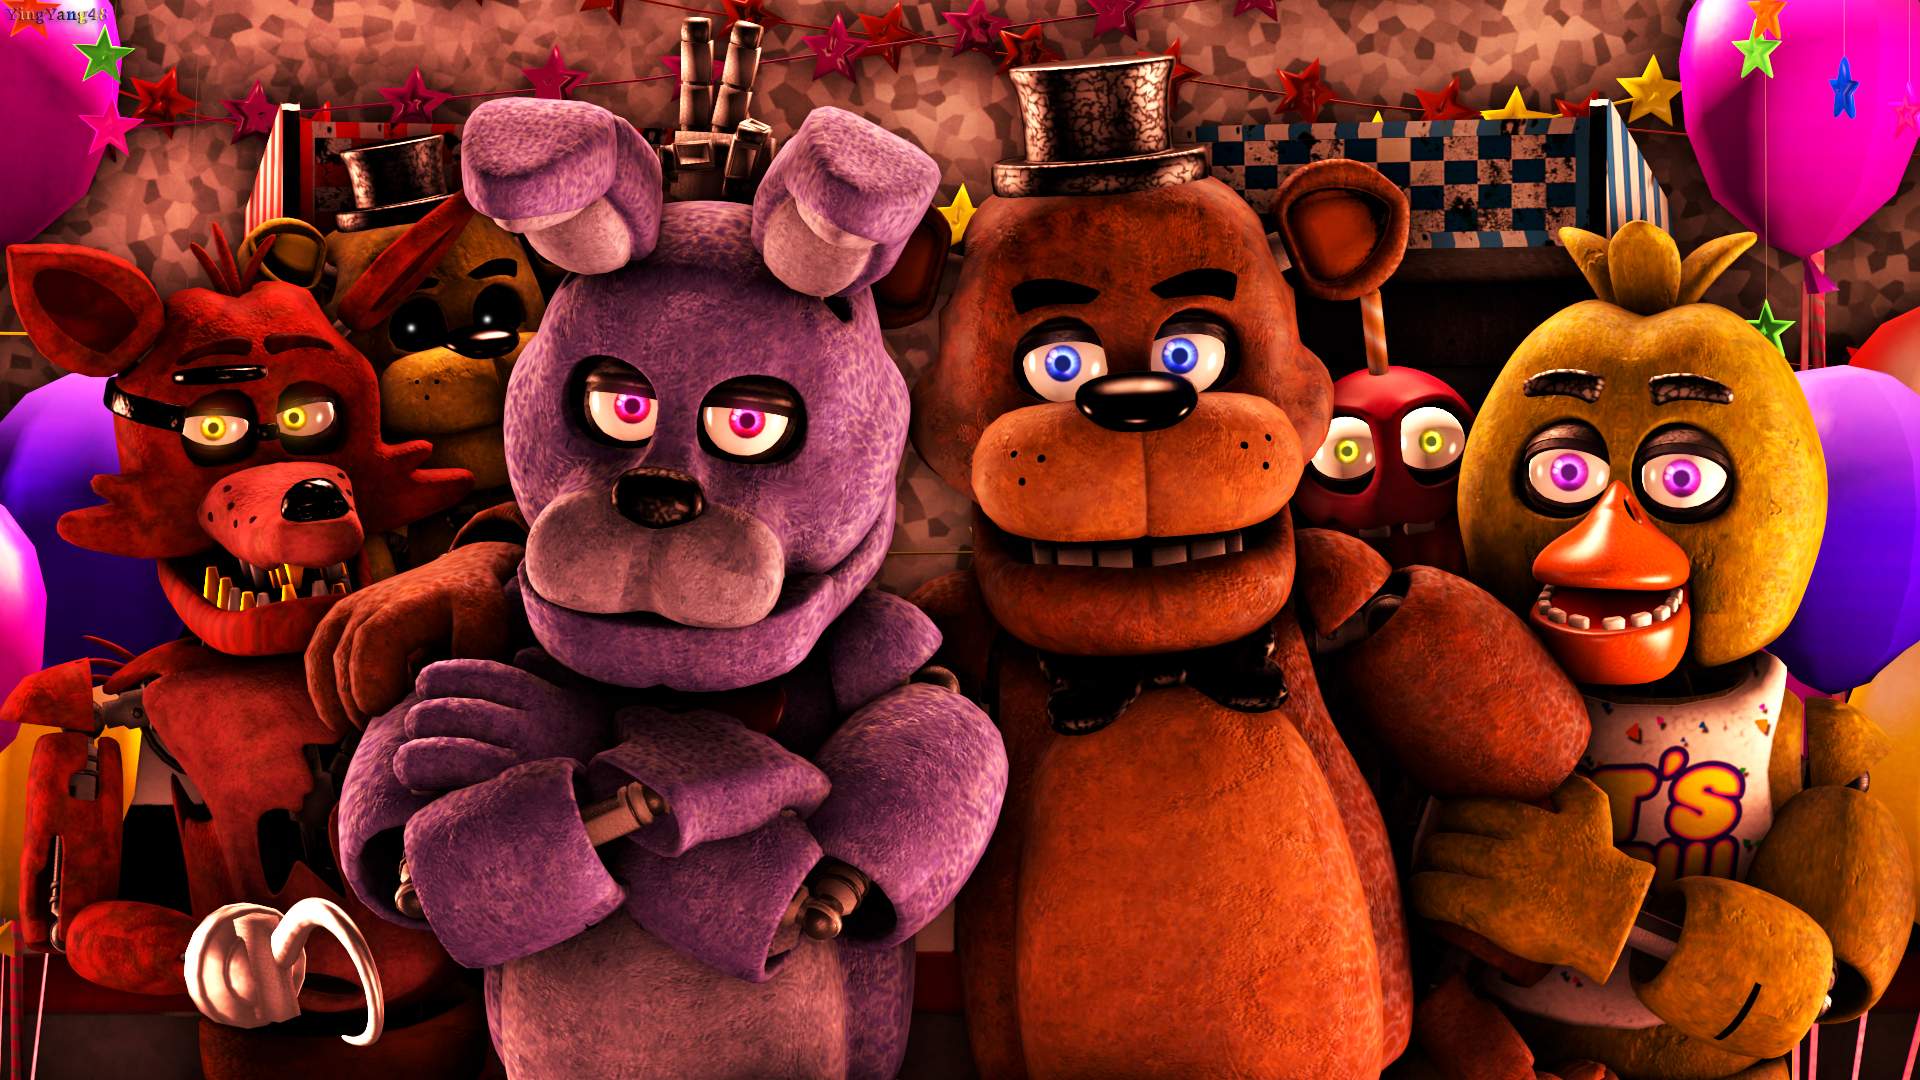 Five Nights At Freddys / Songs 3817-0660-0409